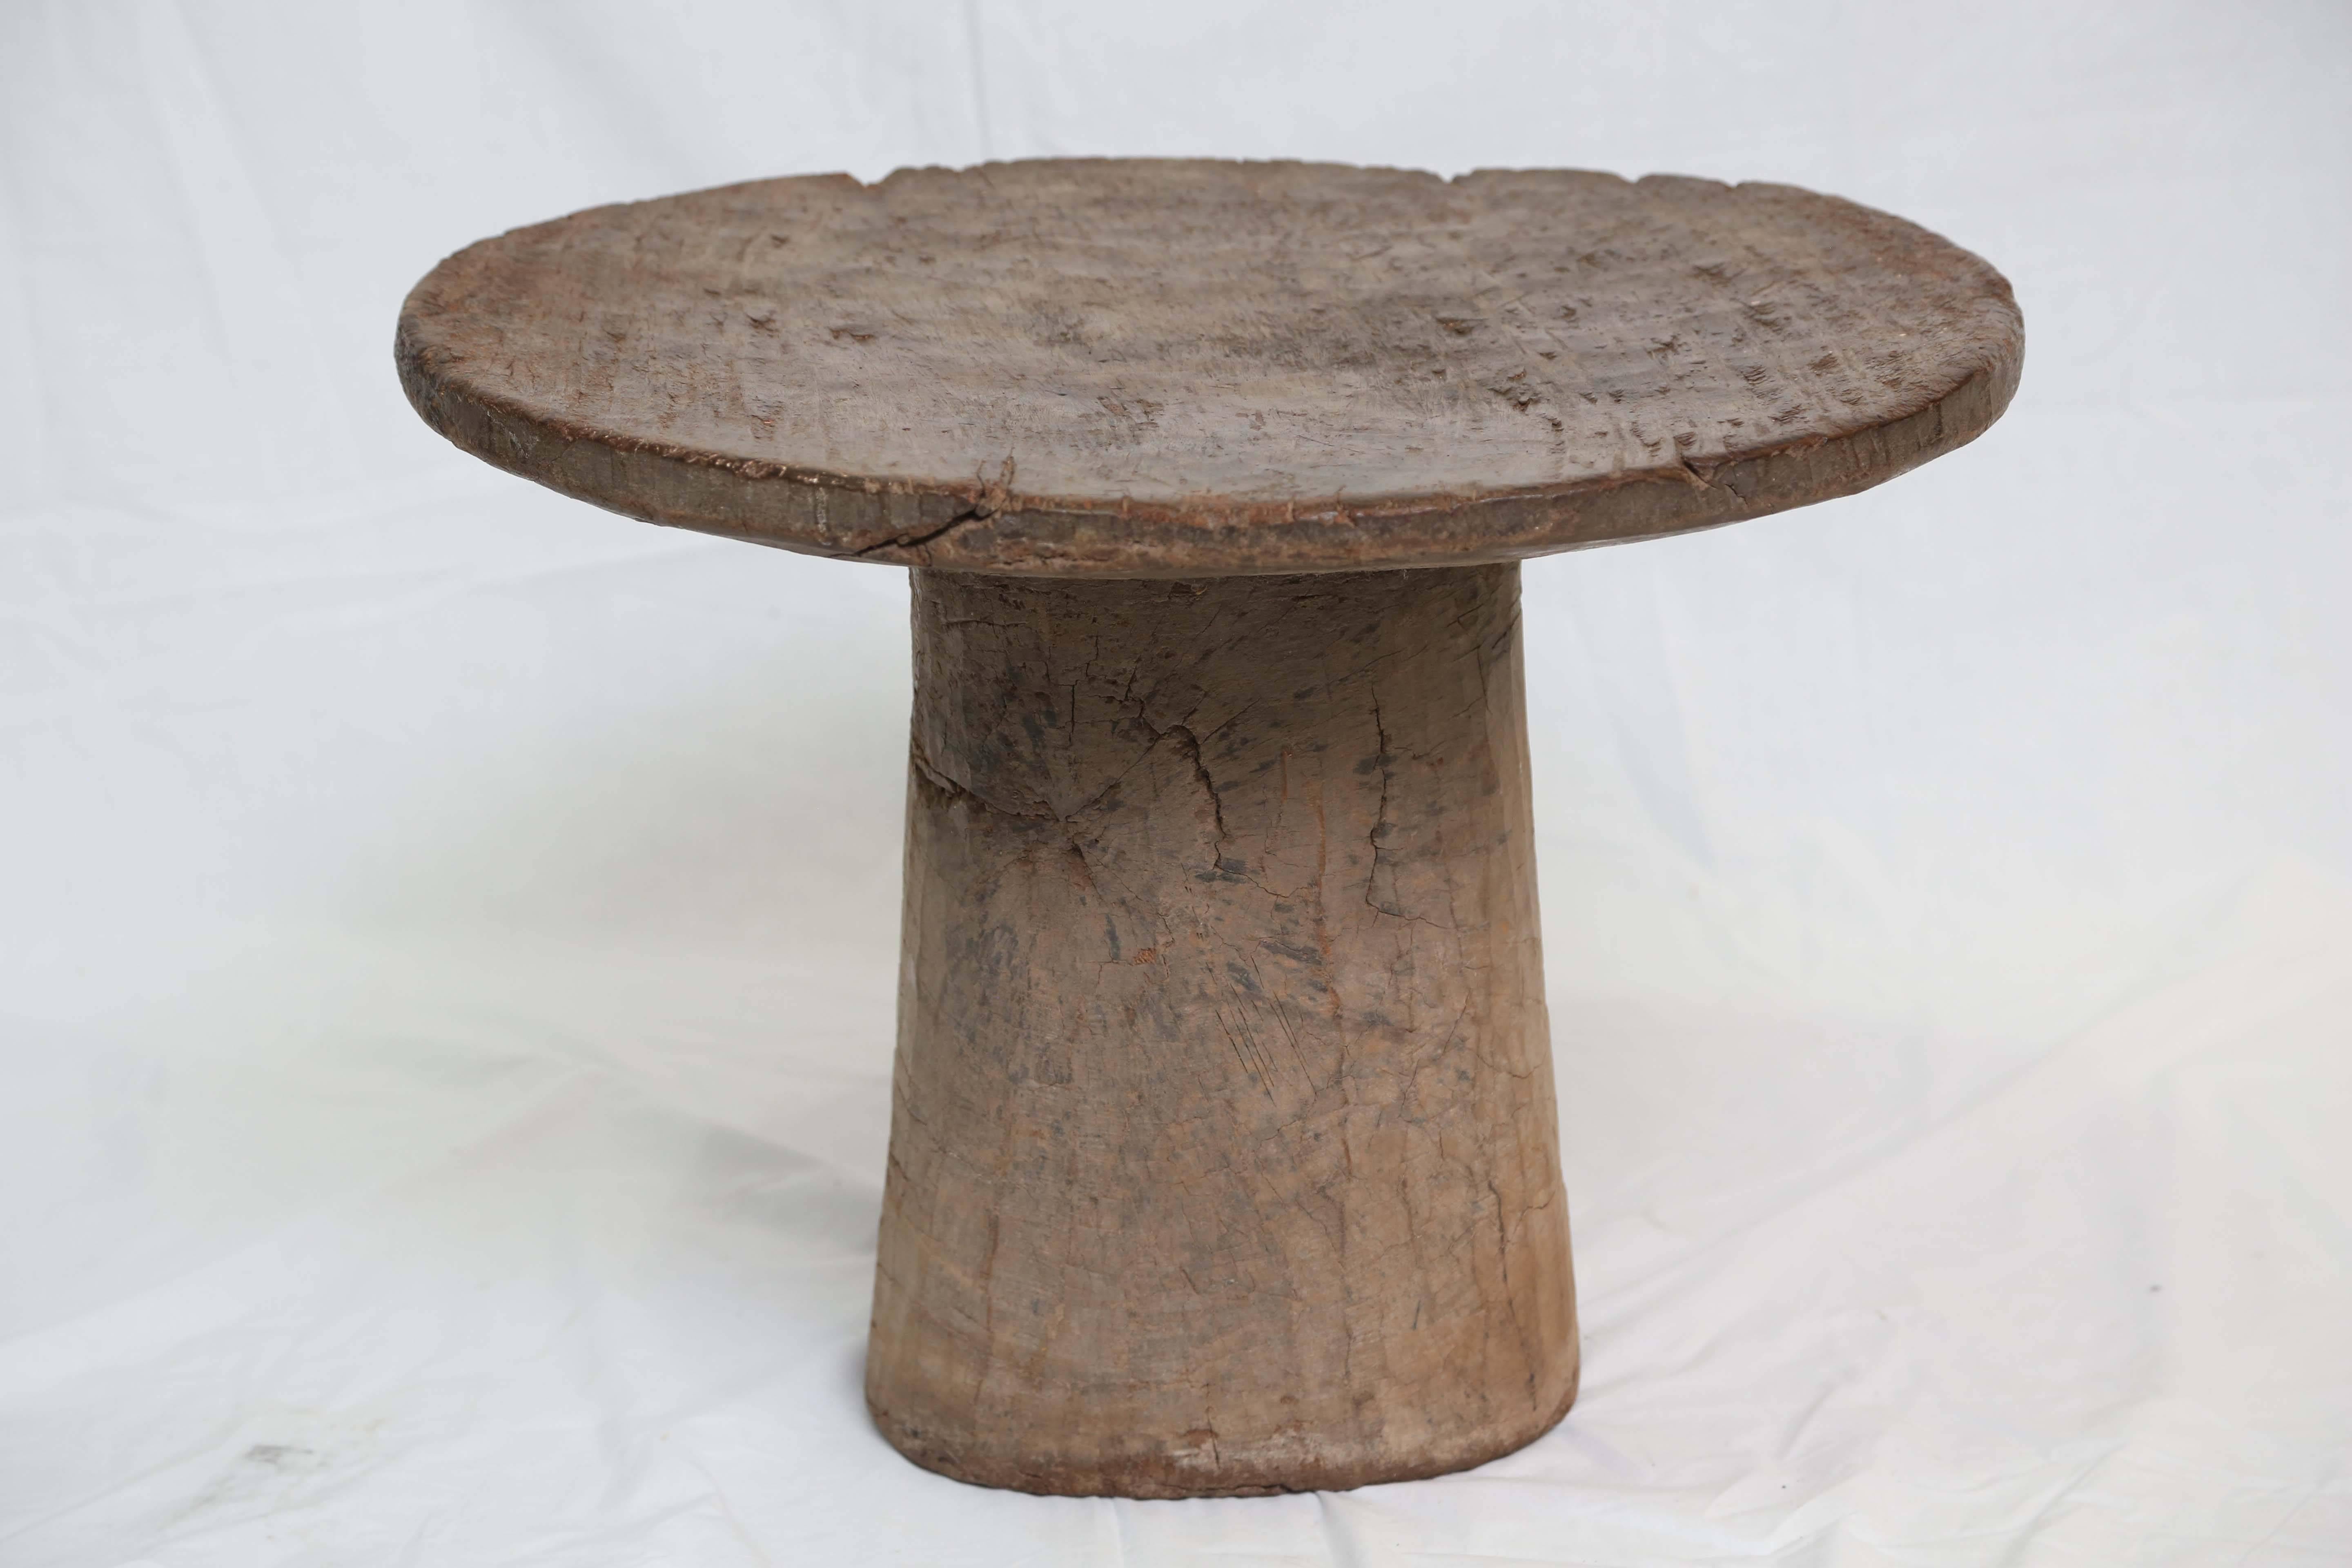 This is a stunning African ceremonial treasure, very much used with great patina, very heavy, carved from a solid tree trunk of an African tree, it makes a strong contemporary effect. It can be used with contemporary interiors, with its great